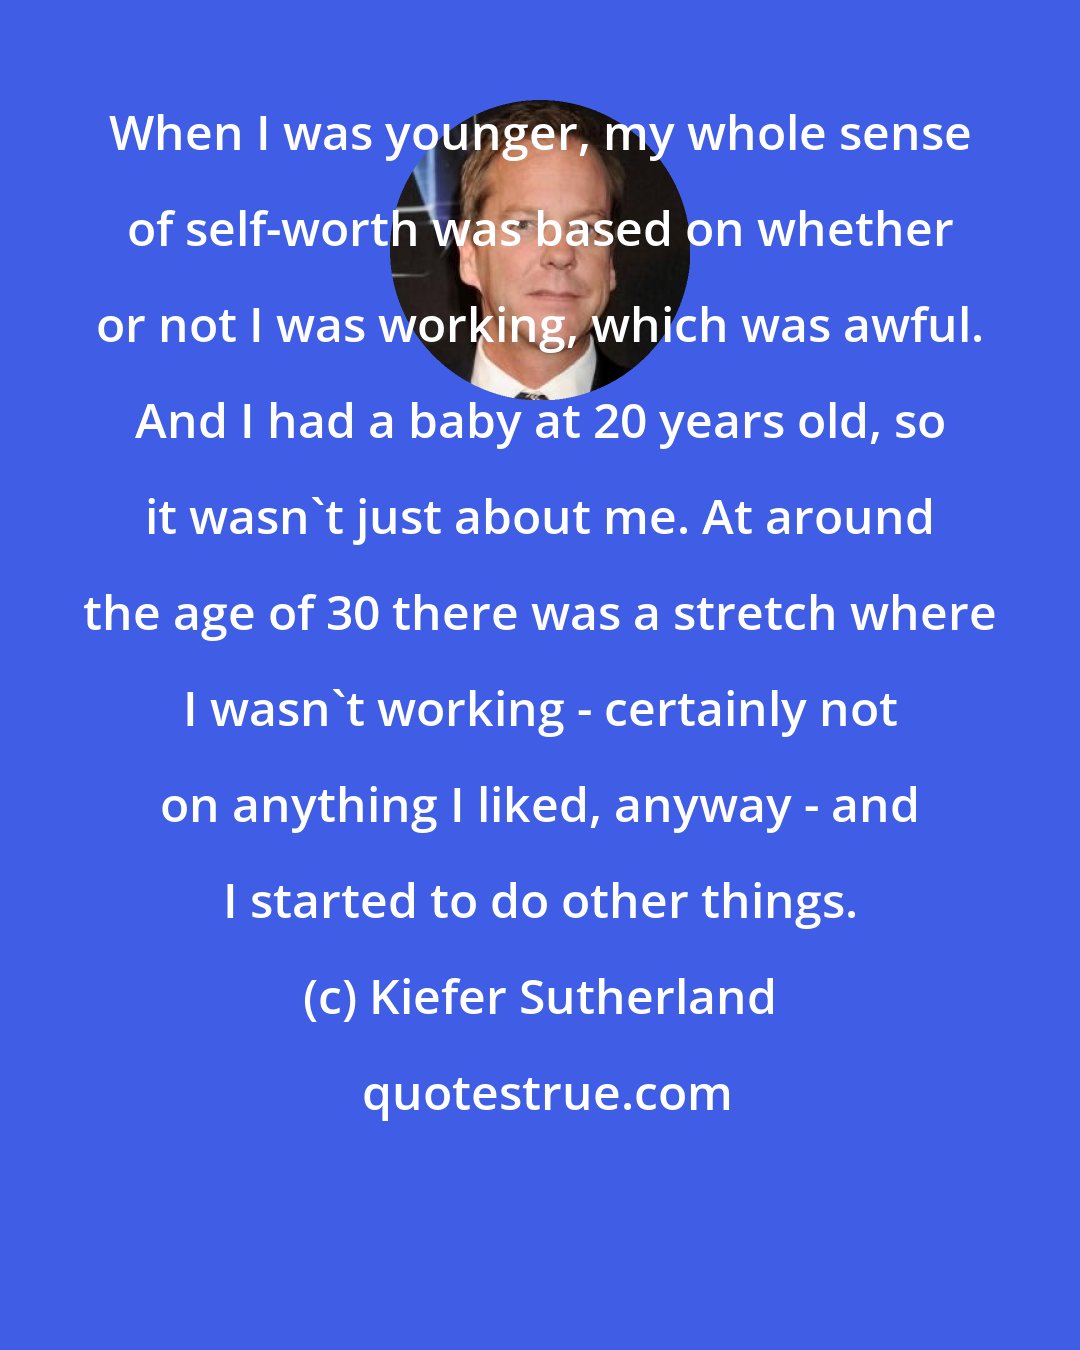 Kiefer Sutherland: When I was younger, my whole sense of self-worth was based on whether or not I was working, which was awful. And I had a baby at 20 years old, so it wasn't just about me. At around the age of 30 there was a stretch where I wasn't working - certainly not on anything I liked, anyway - and I started to do other things.